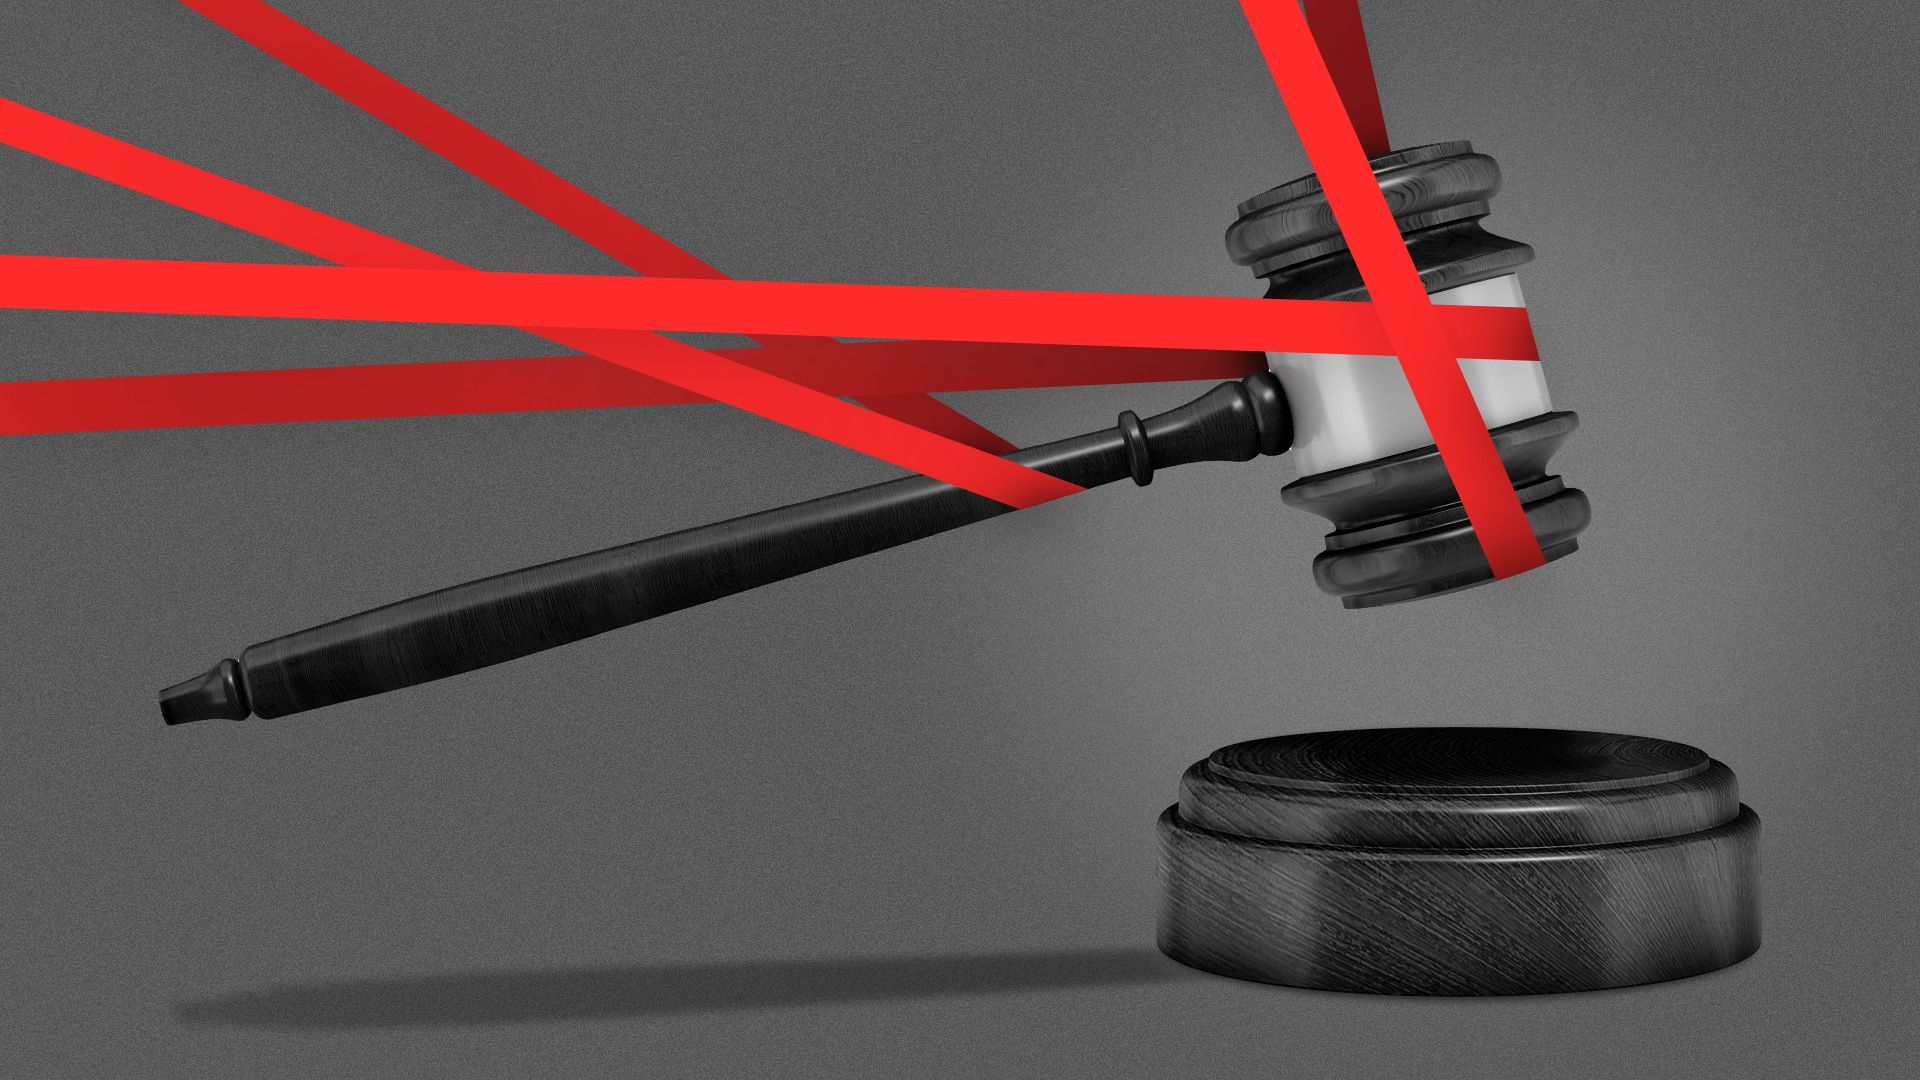 Illustration of red tape holding a gavel back from striking a block.